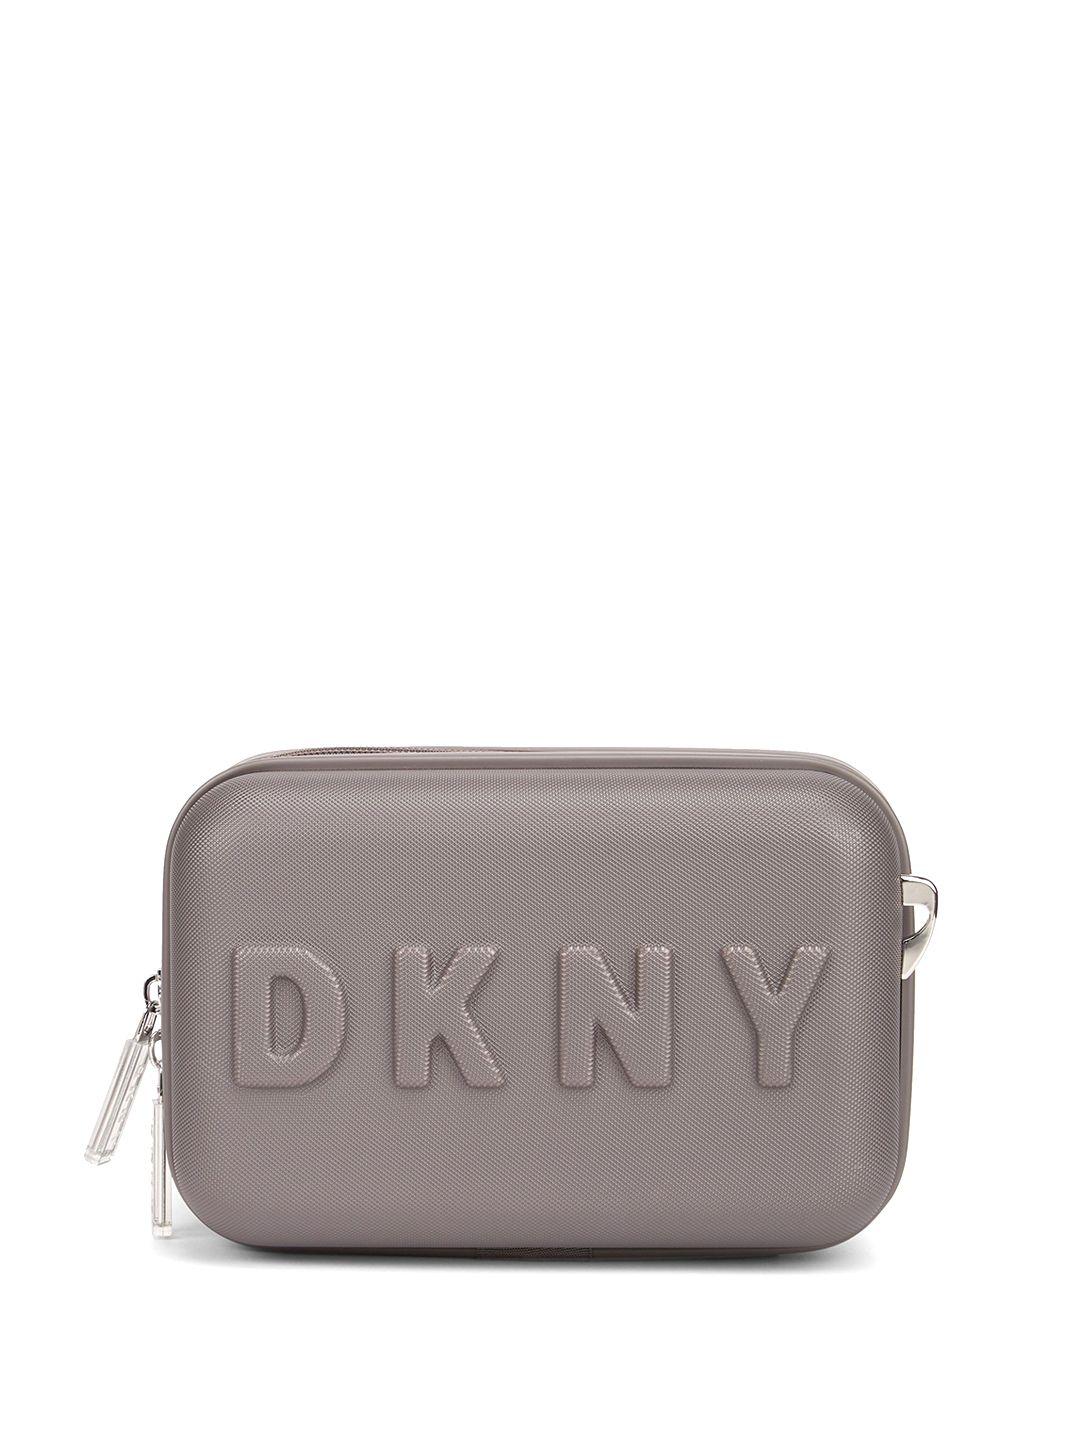 dkny-abs-hard-beauty-case-makeup-pouch